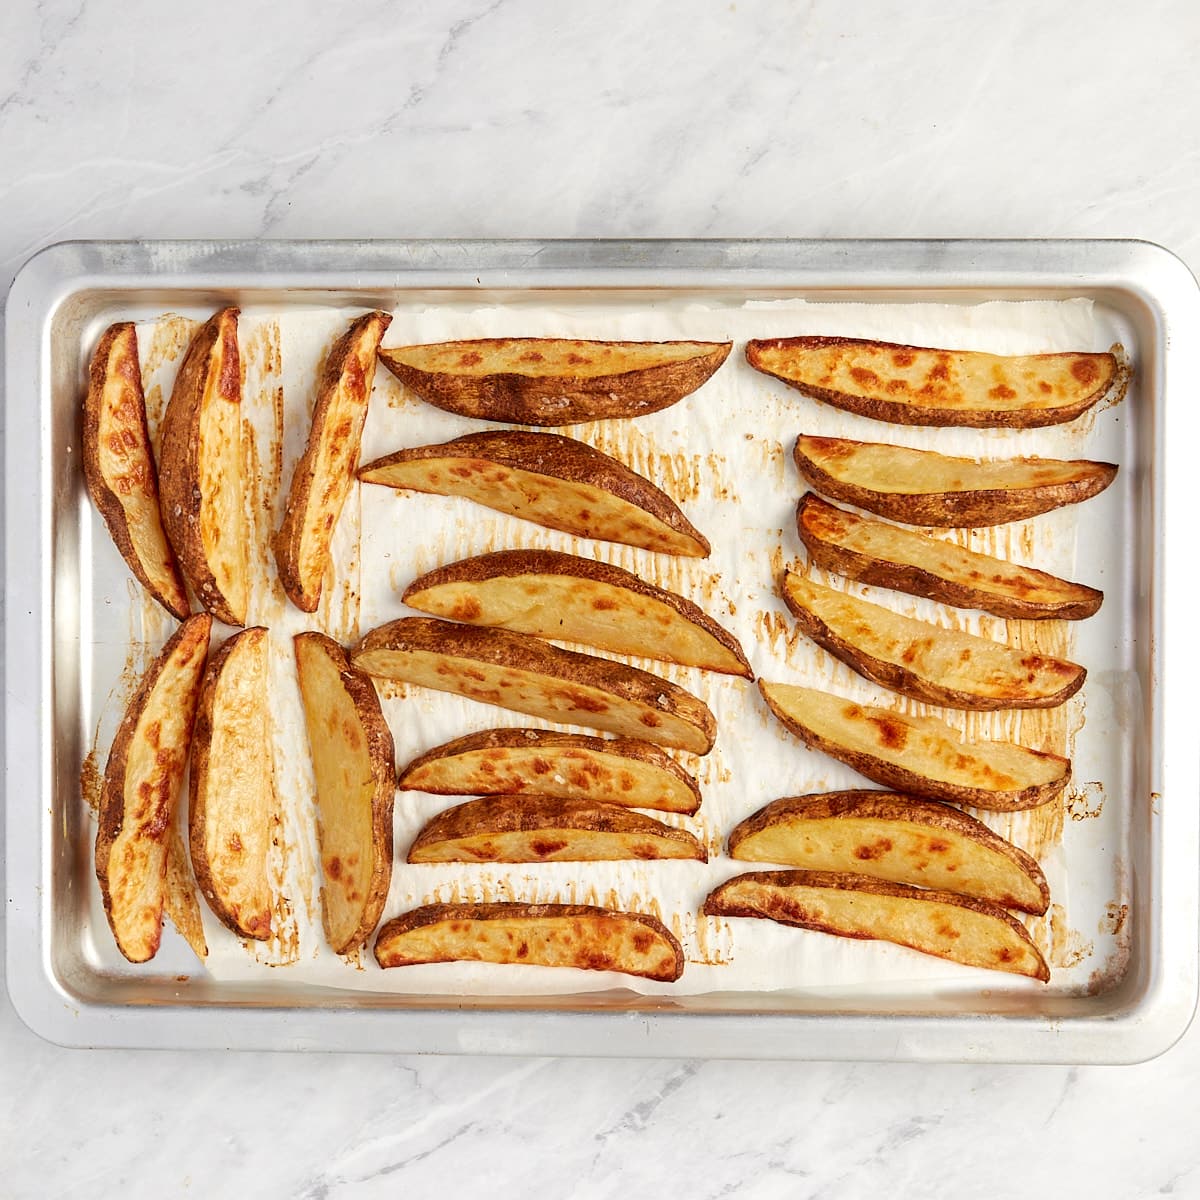 baked wedges on a cookie sheet without toppings.